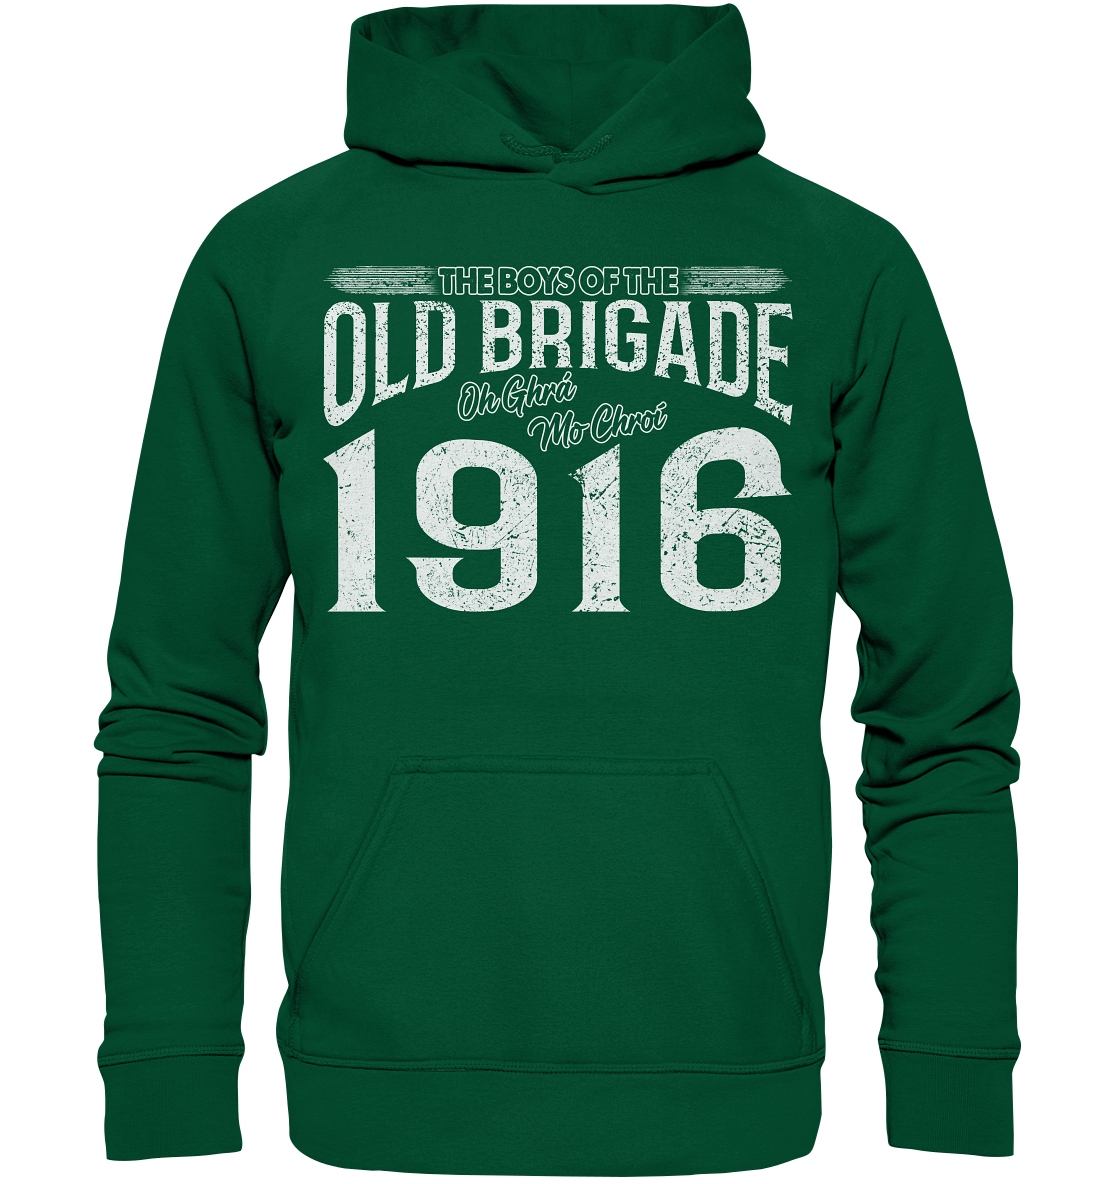 The Boys Of The Old Brigade - Basic Unisex Hoodie